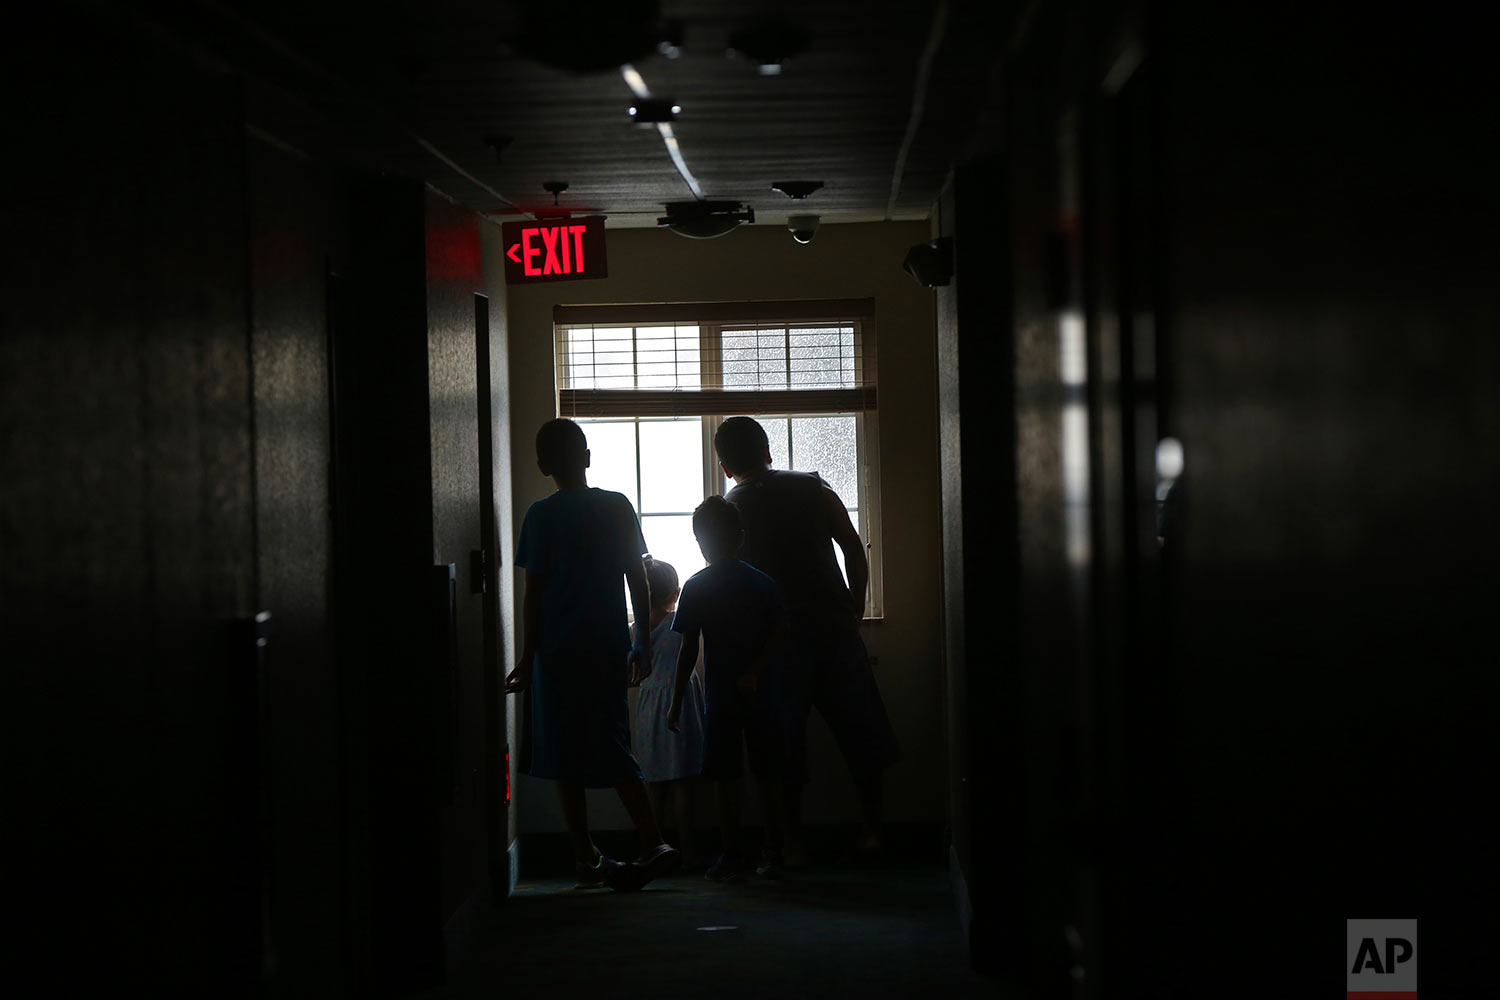  Guests of the Candlewood Suites look out a darkened hall window, after the hotel lost power, as Hurricane Irma arrives, in Fort Myers, Fla., Sunday, Sept. 10, 2017. (AP Photo/Gerald Herbert) 